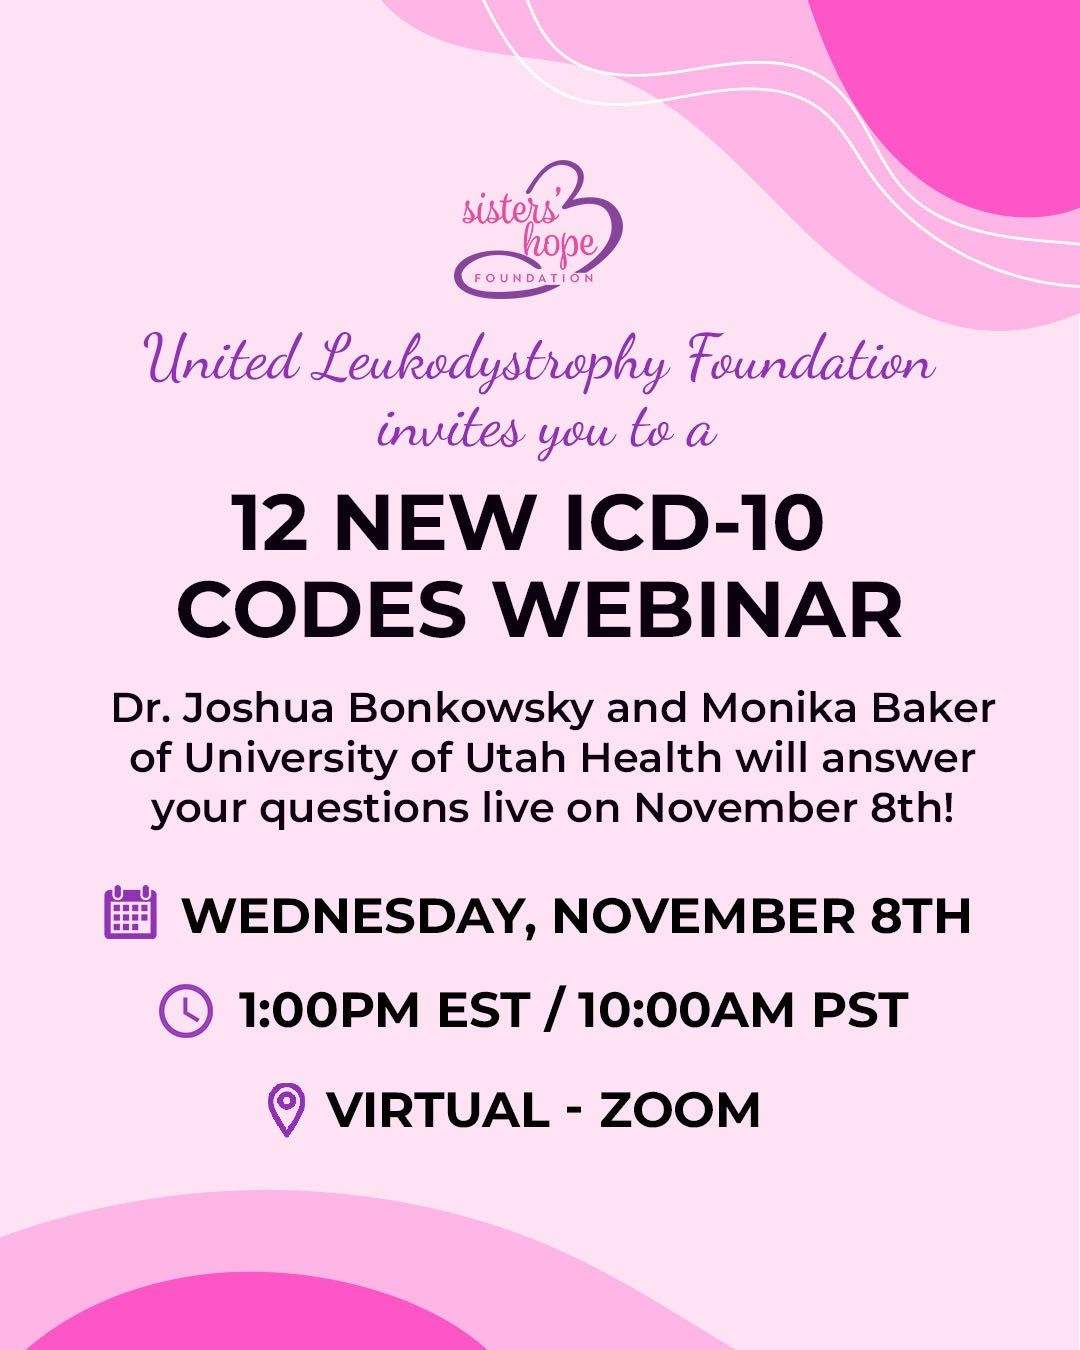 What does it mean? 12 New ICD-10 Codes Webinar